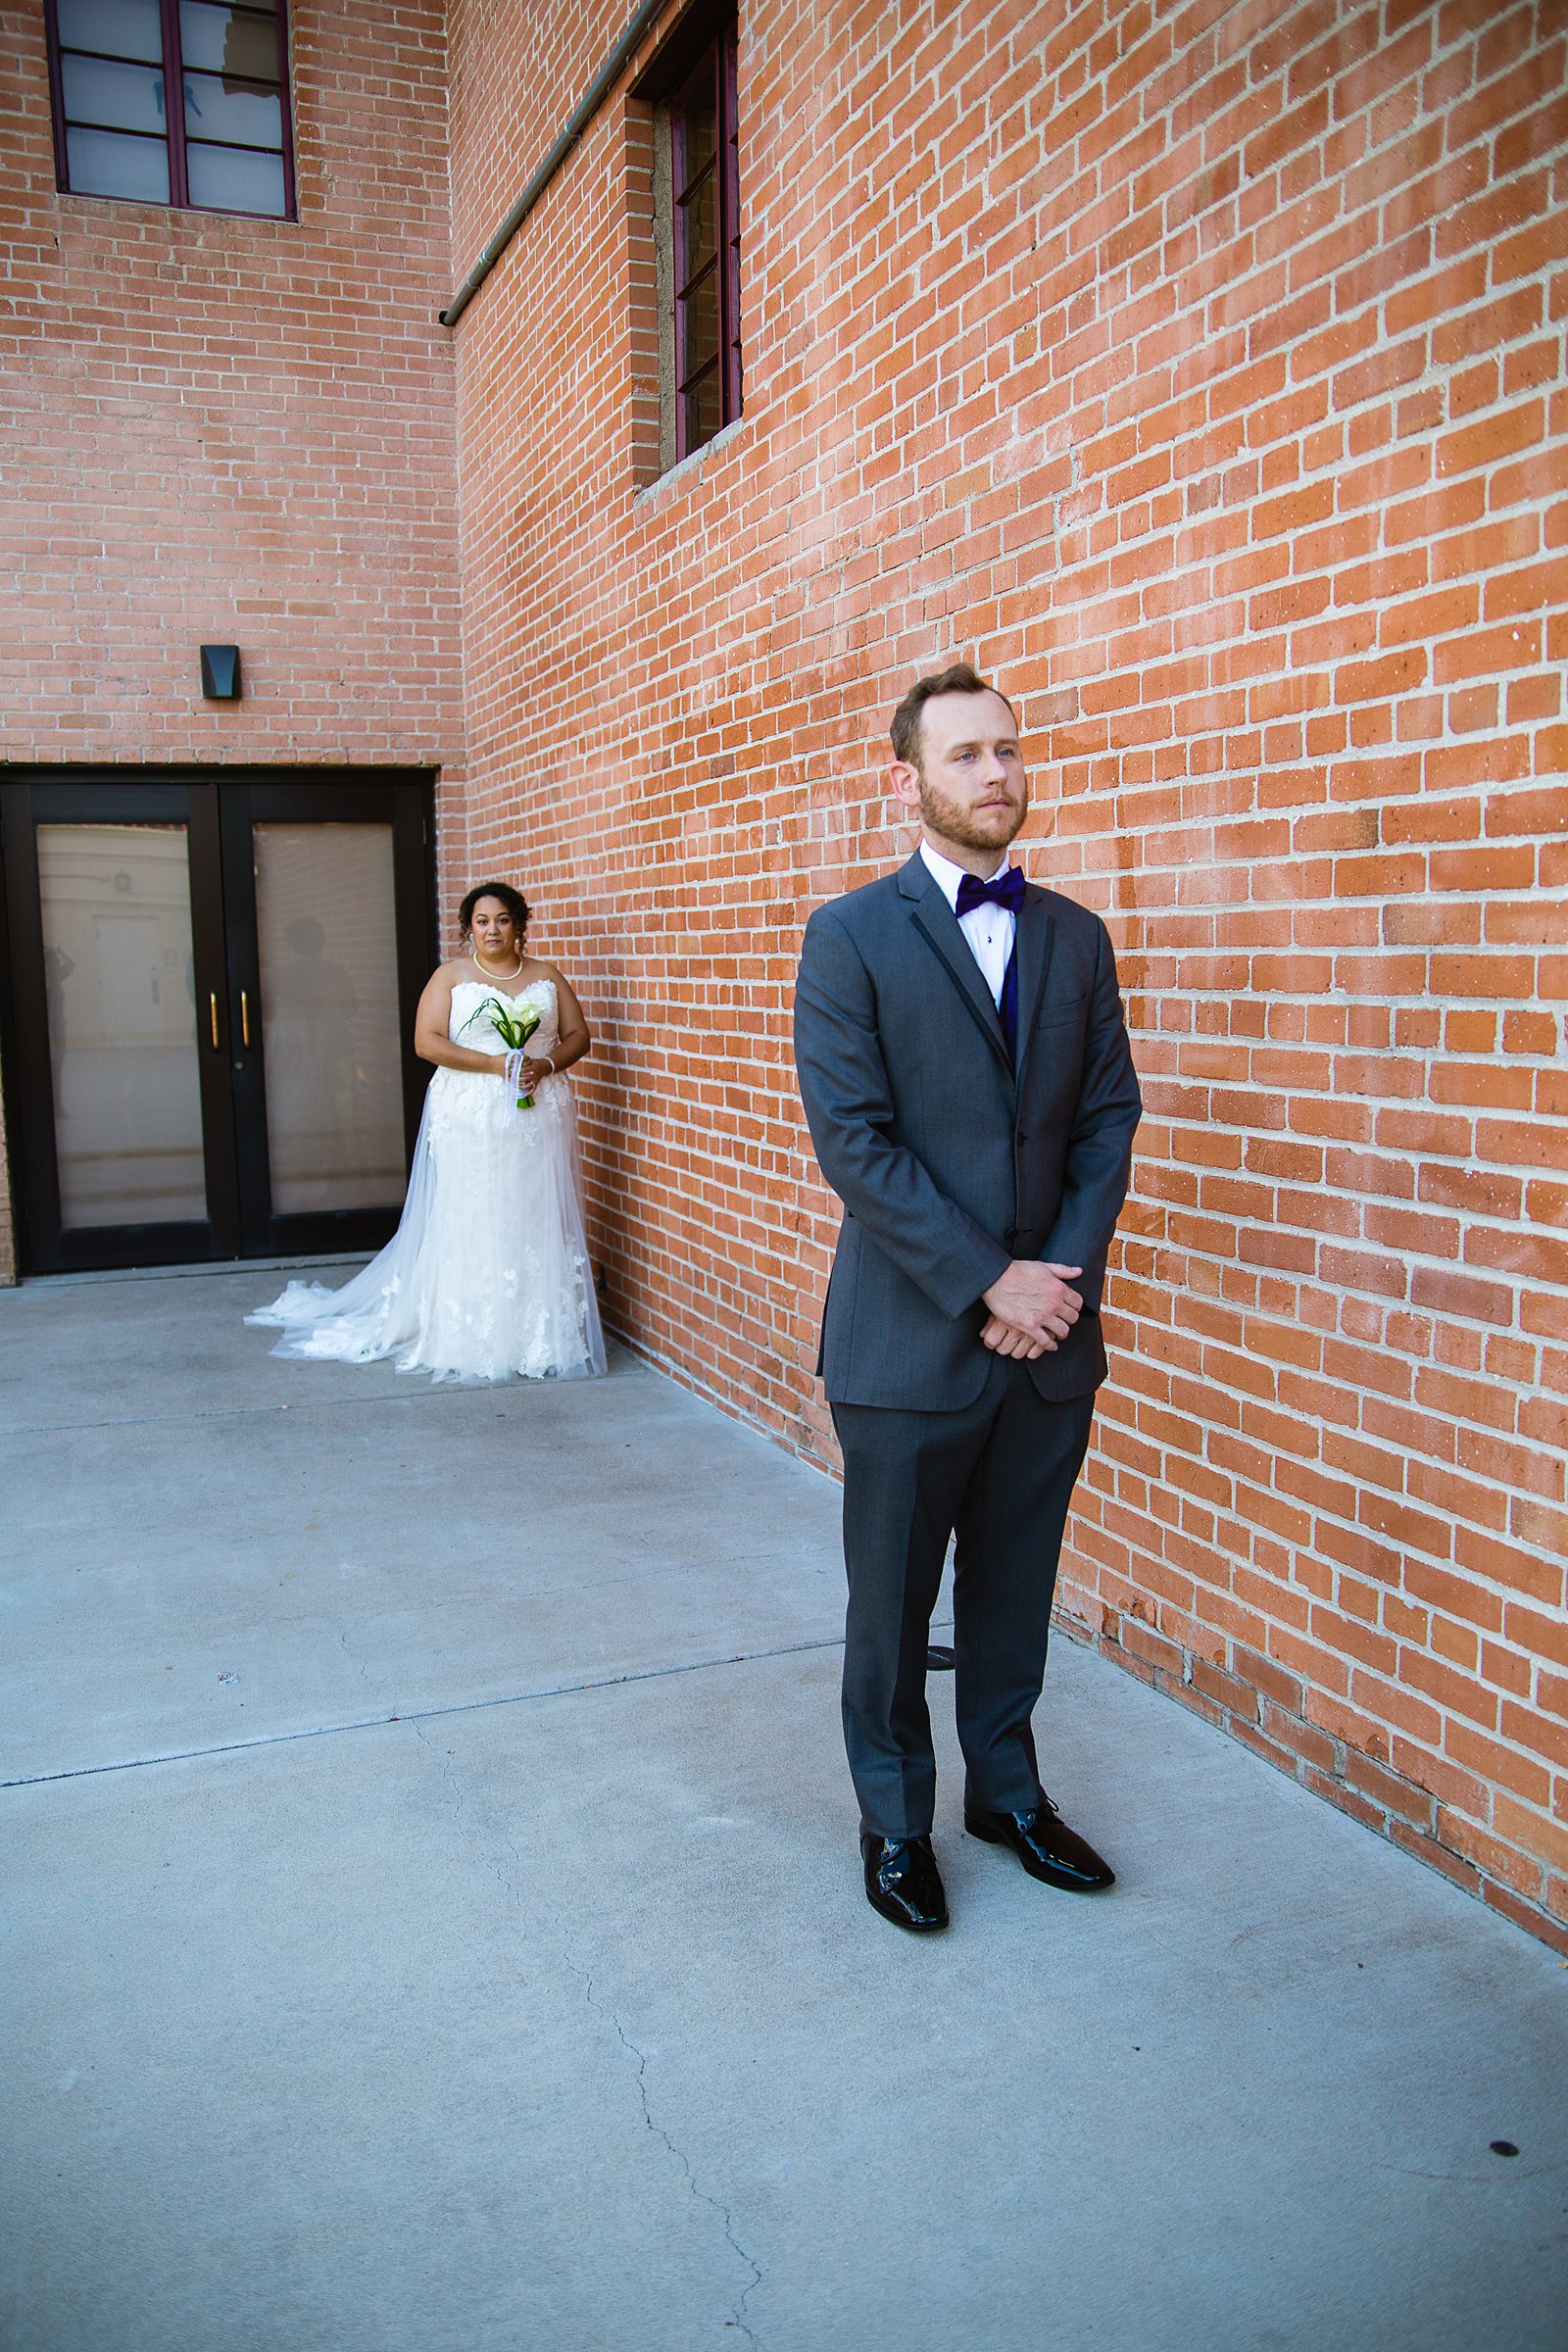 Bride and groom's first look at Encanto Park by Arizona wedding photographer PMA Photography.